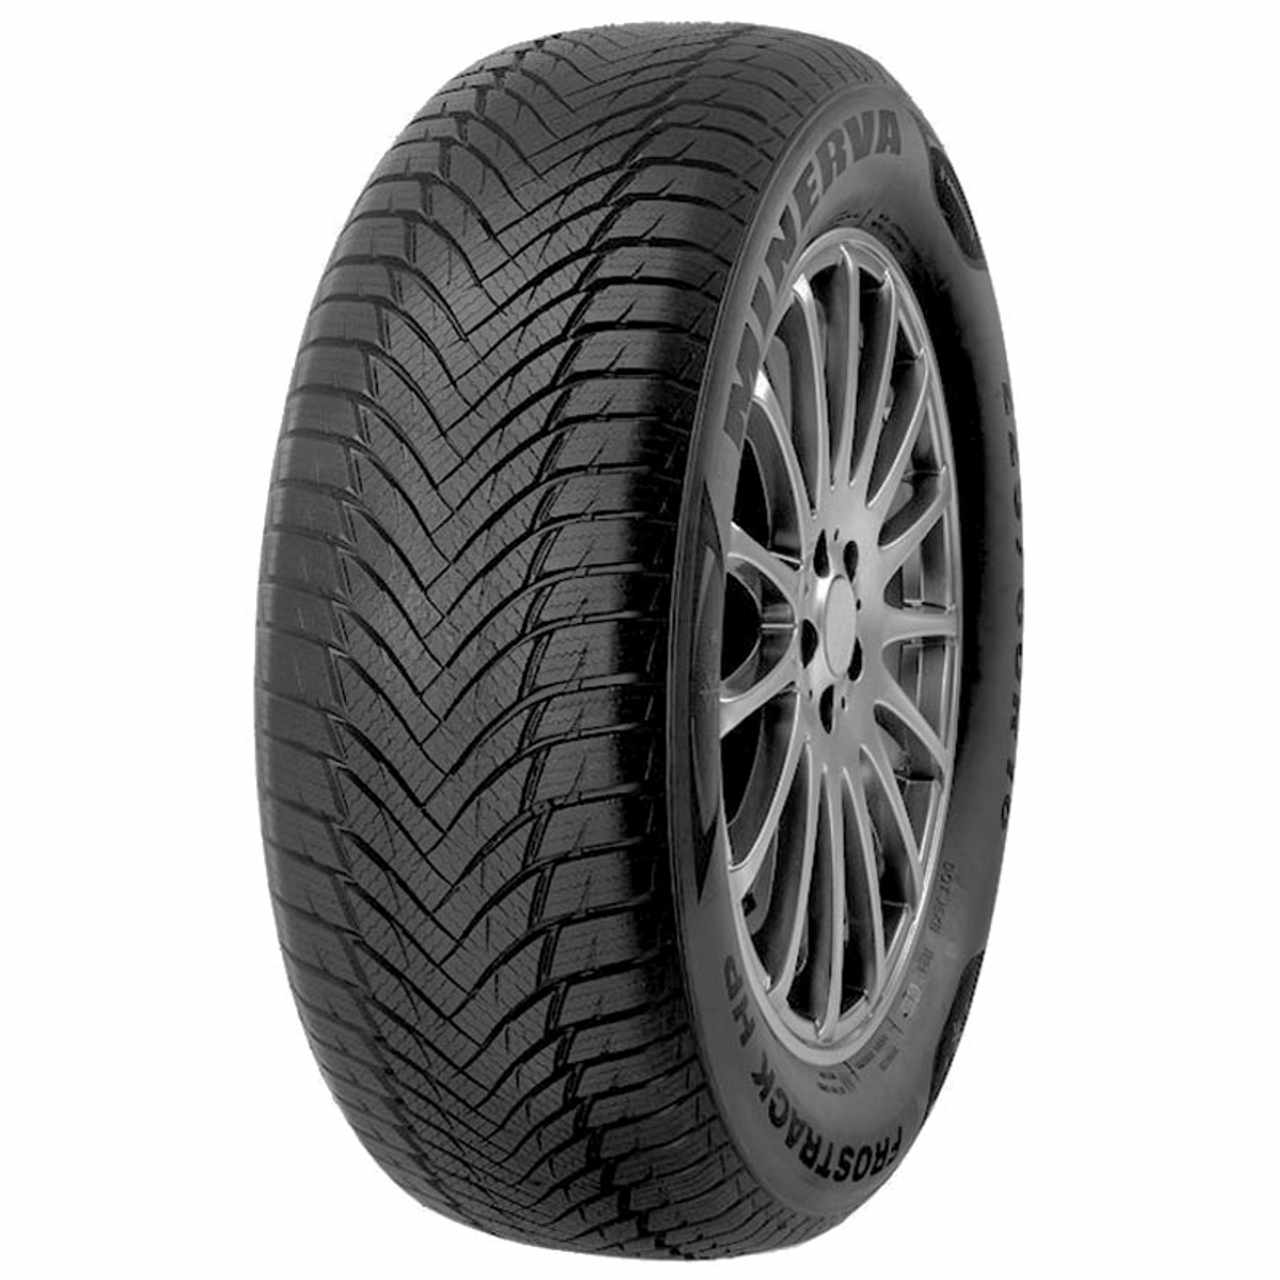 MINERVA FROSTRACK HP 195/55R16 91V BSW